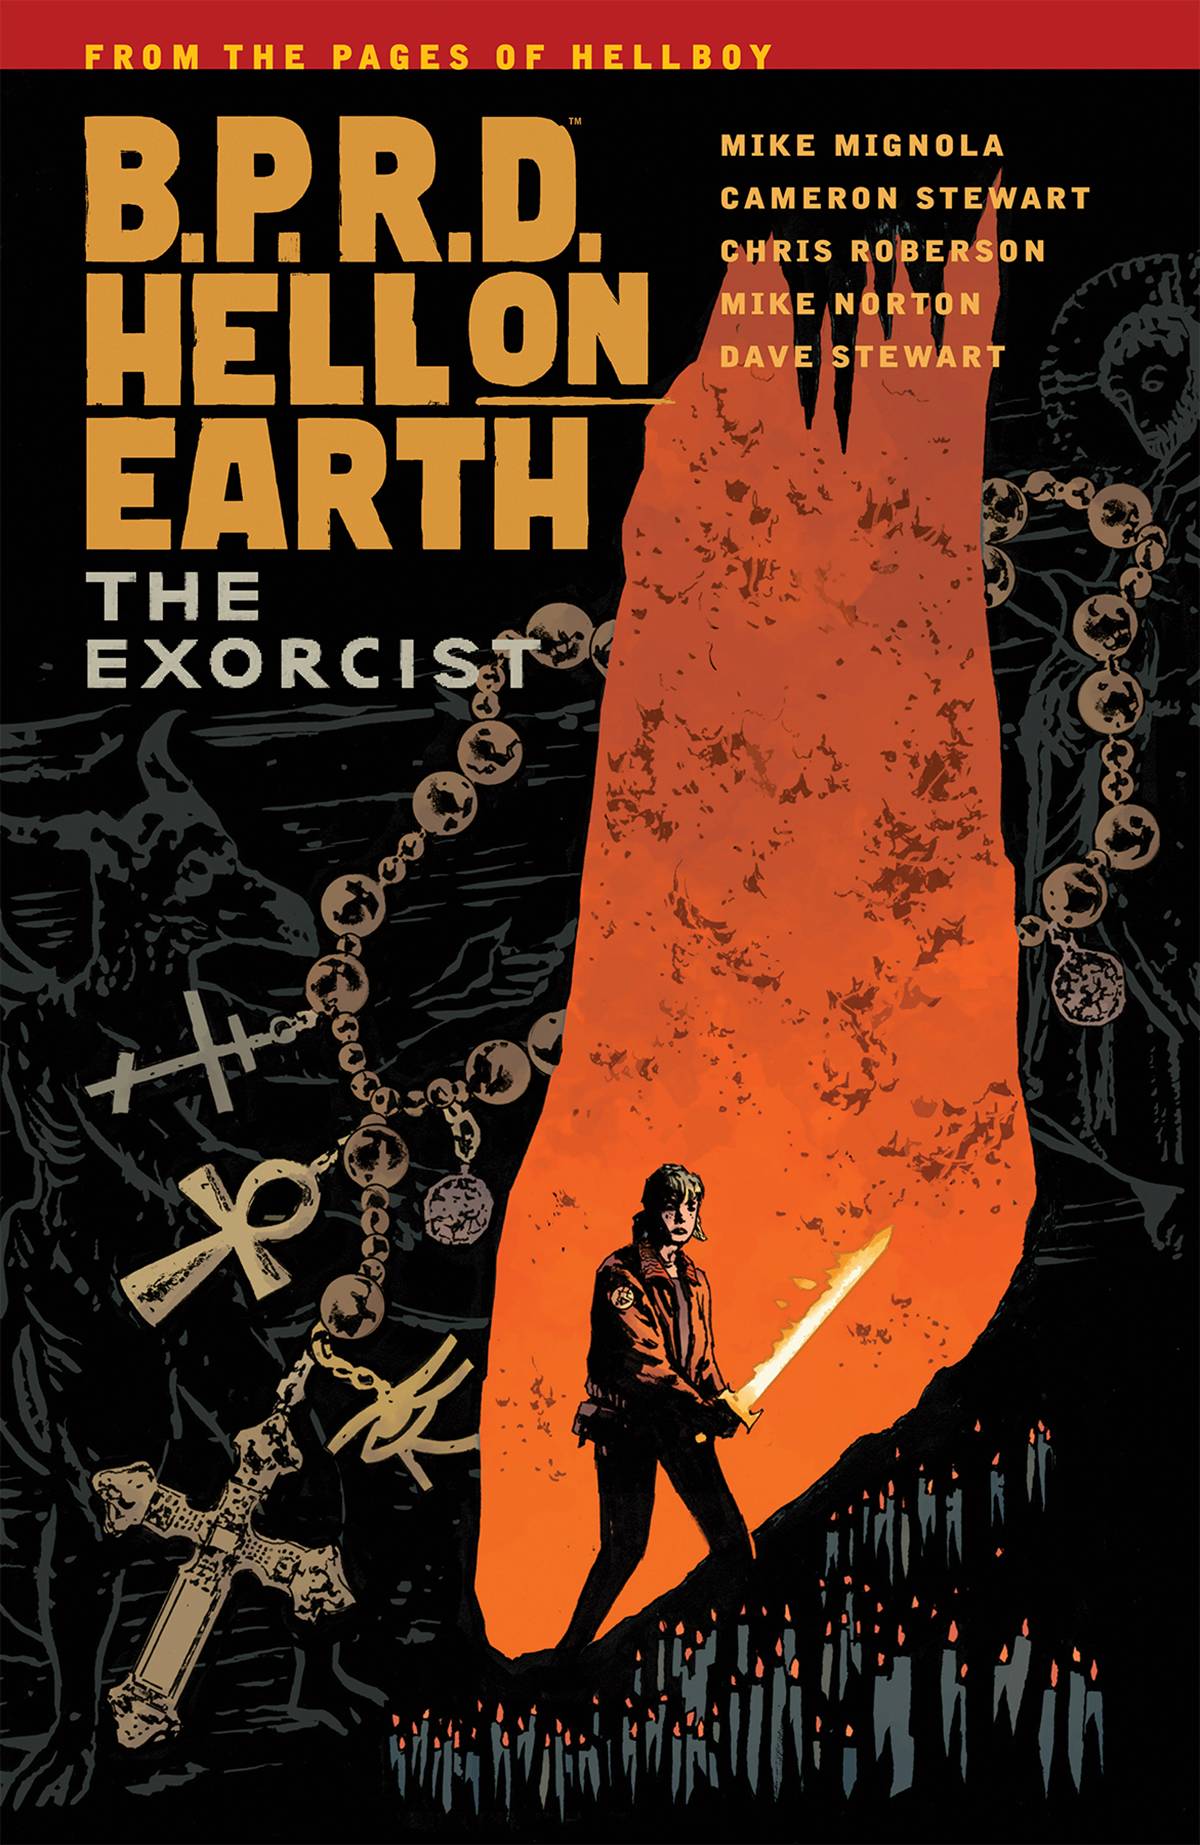 BPRD HELL ON EARTH TP VOL 14 THE EXORCIST